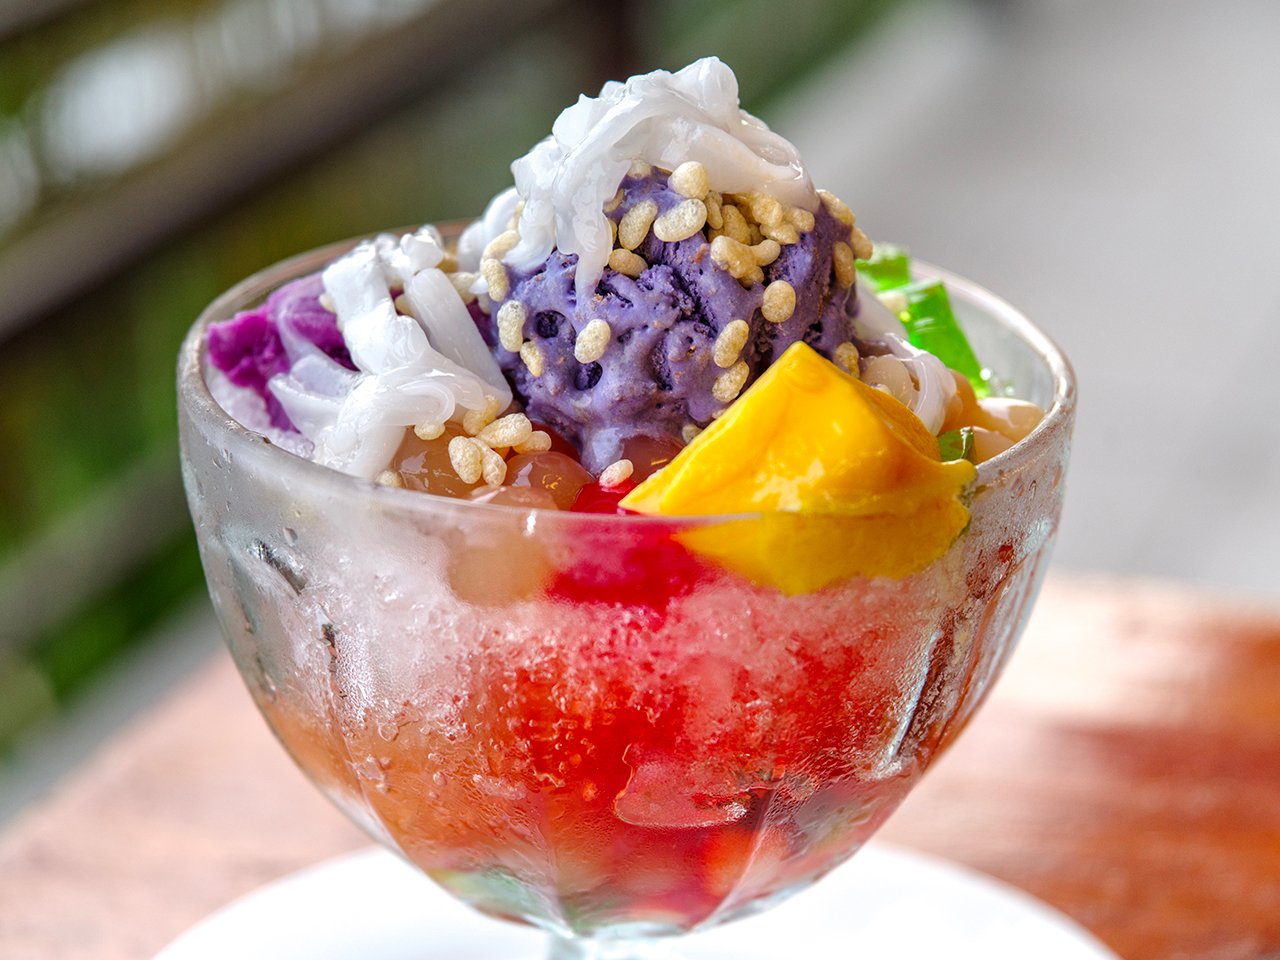 Halo-halo in a glass bowl